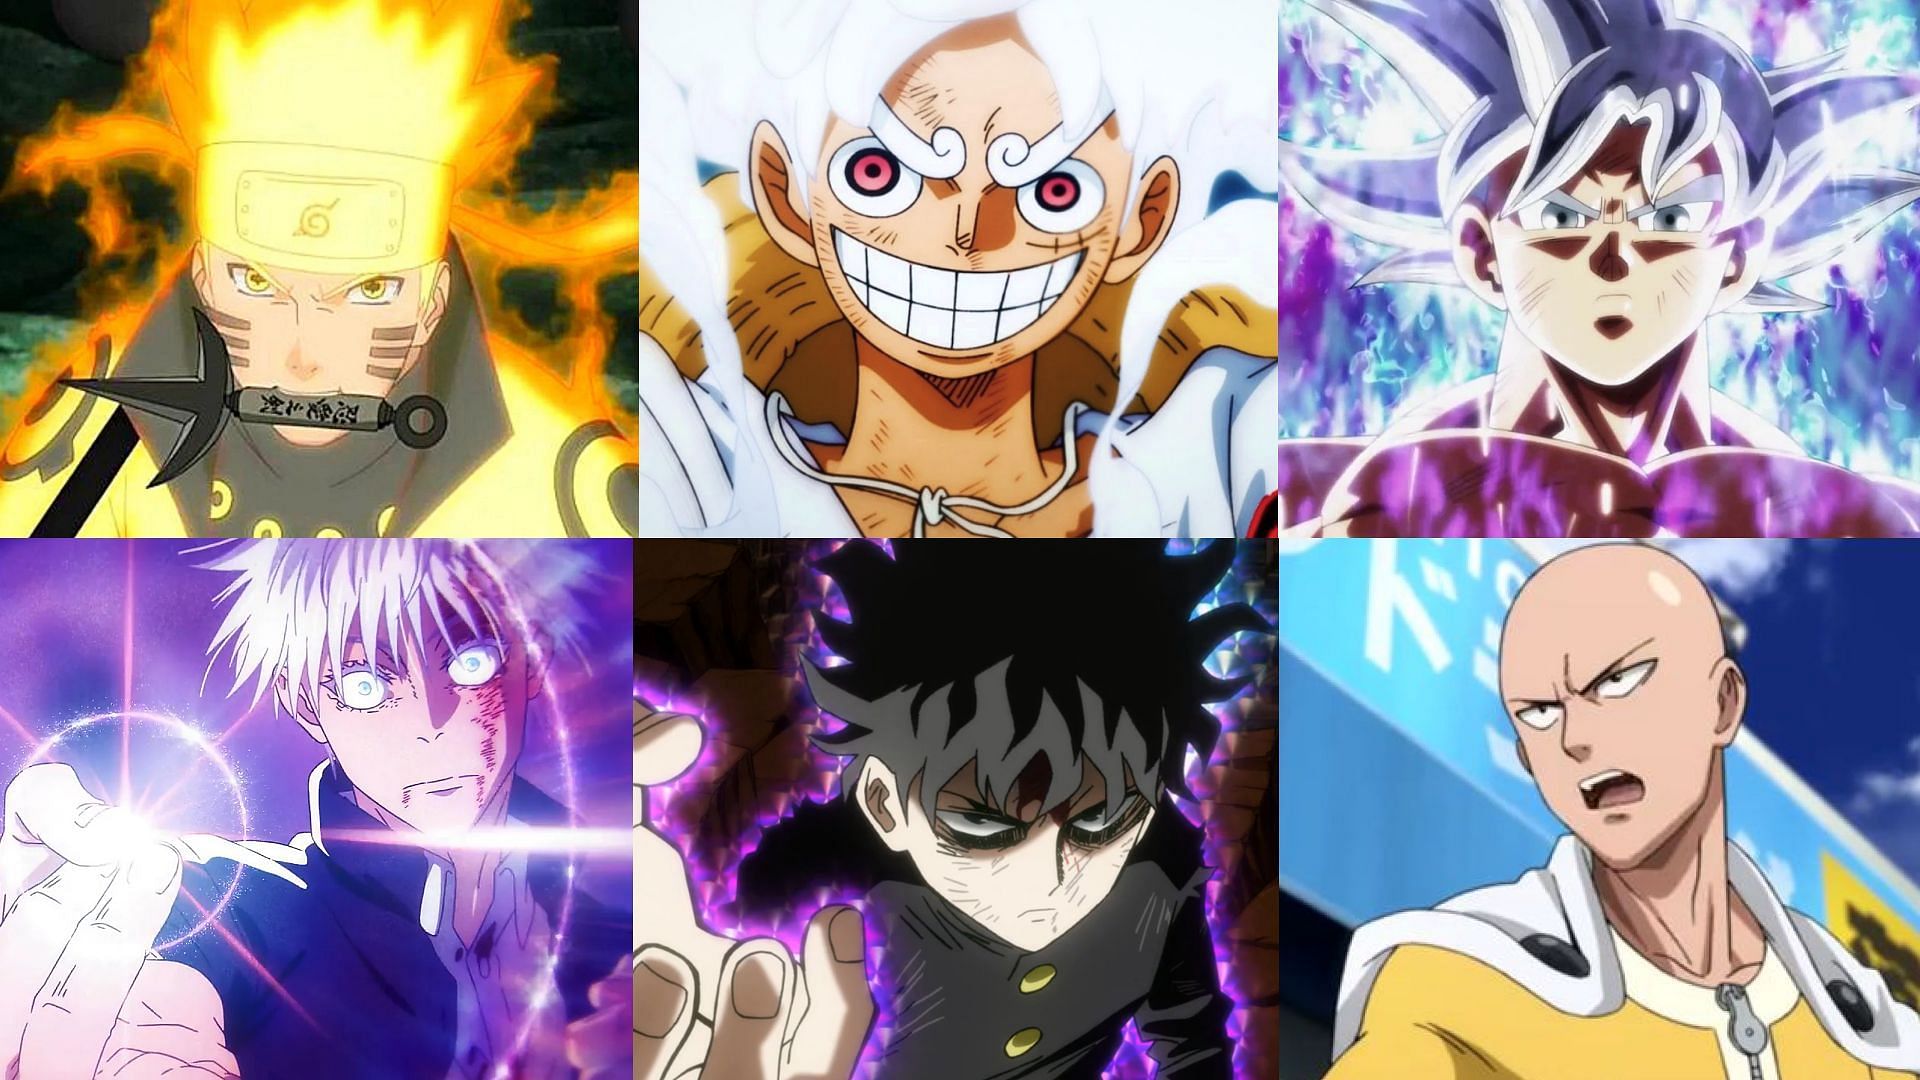 Top 10 Most Powerful Anime Characters of 2021 | Articles on WatchMojo.com